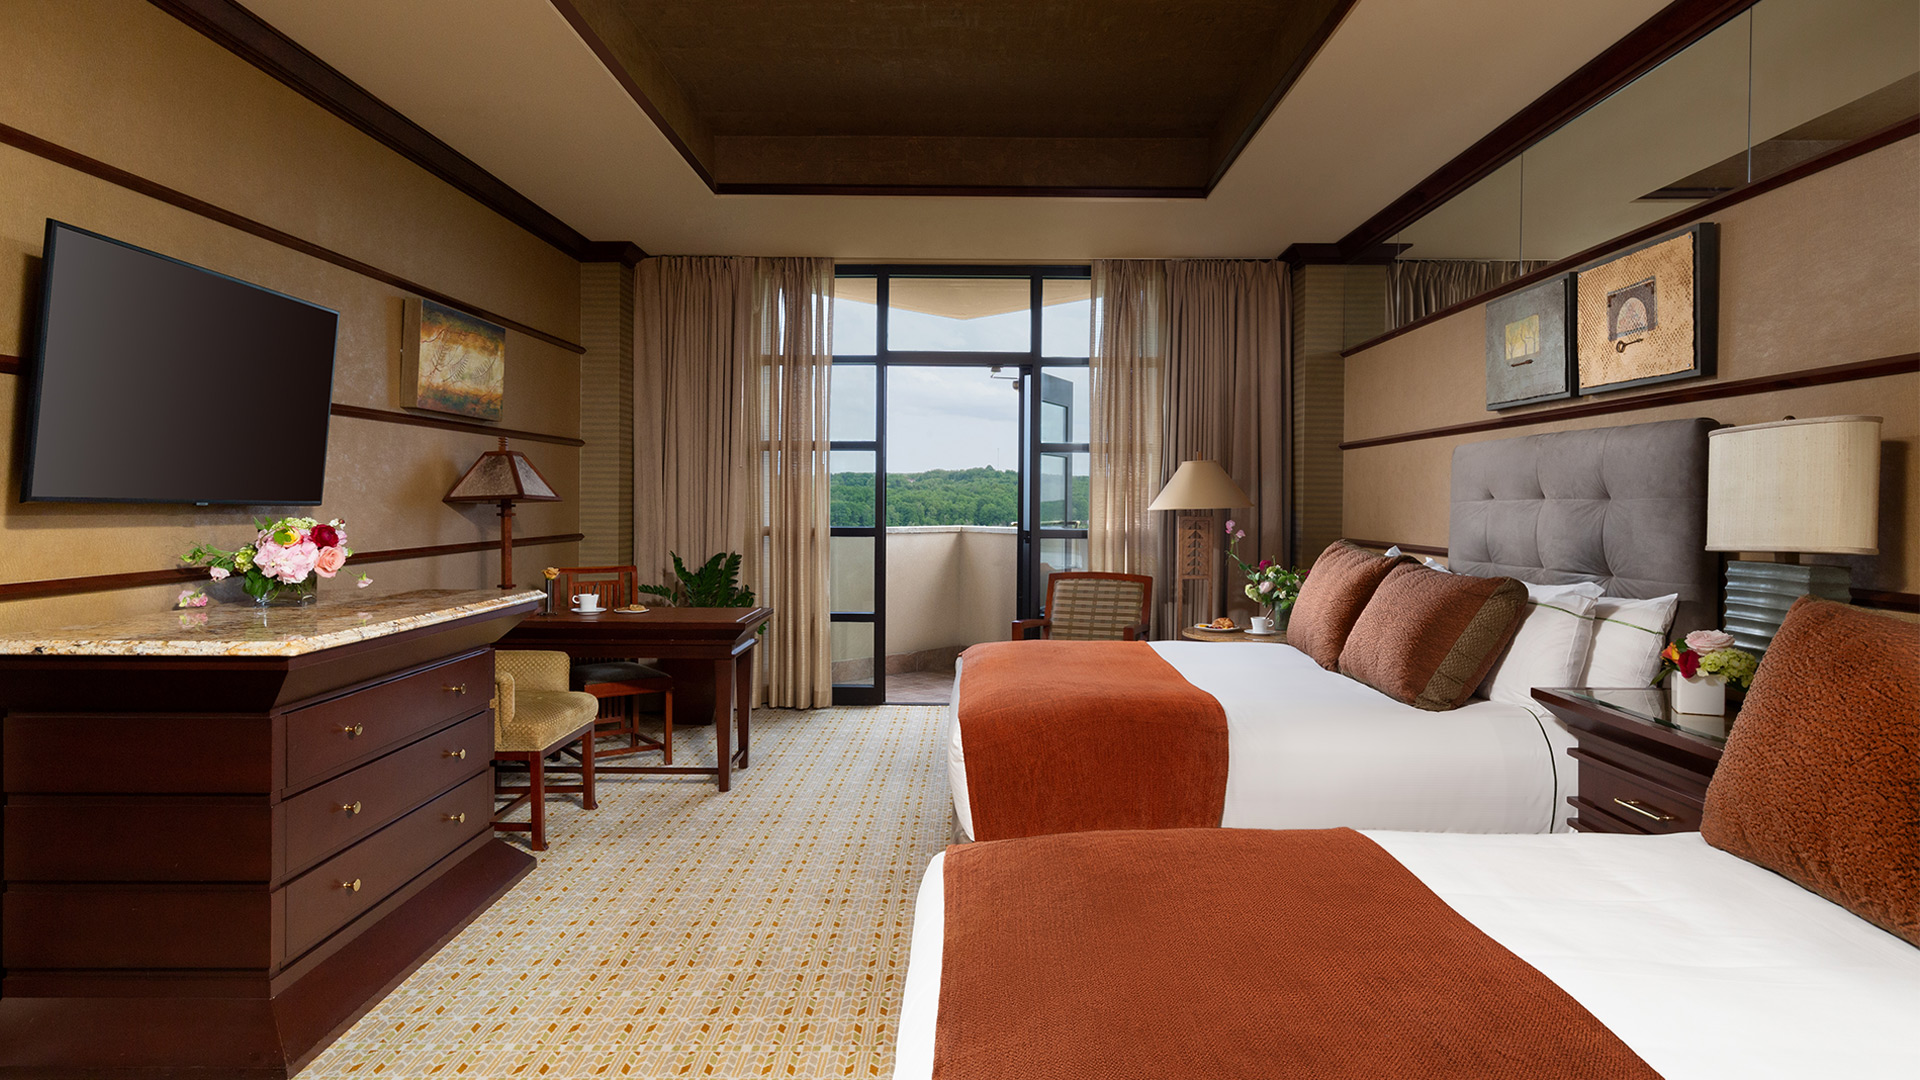 interior shot of Falling Rock's balcony double room. There are two king beds with plush headboards and white, burnt orange and brown bedding. There is a sitting area and a dresser with a flatscreen TV mounted above it. There are doors that lead to a balcony overlooking the resort grounds.